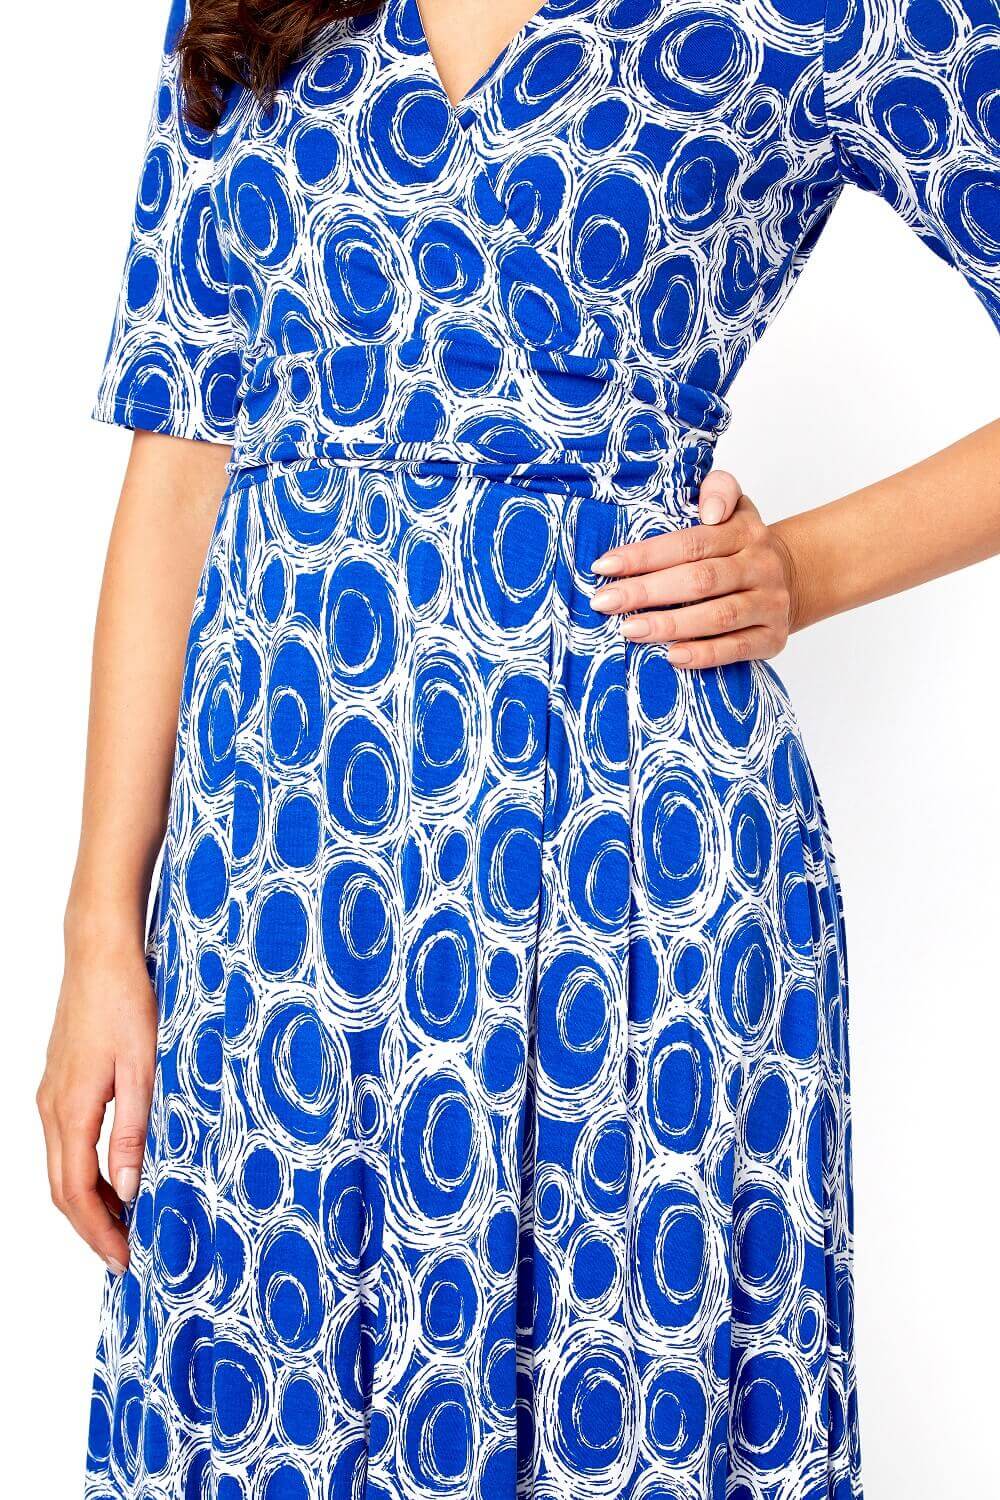 Royal Blue Spot Printed Fit and Flare Dress, Image 4 of 5